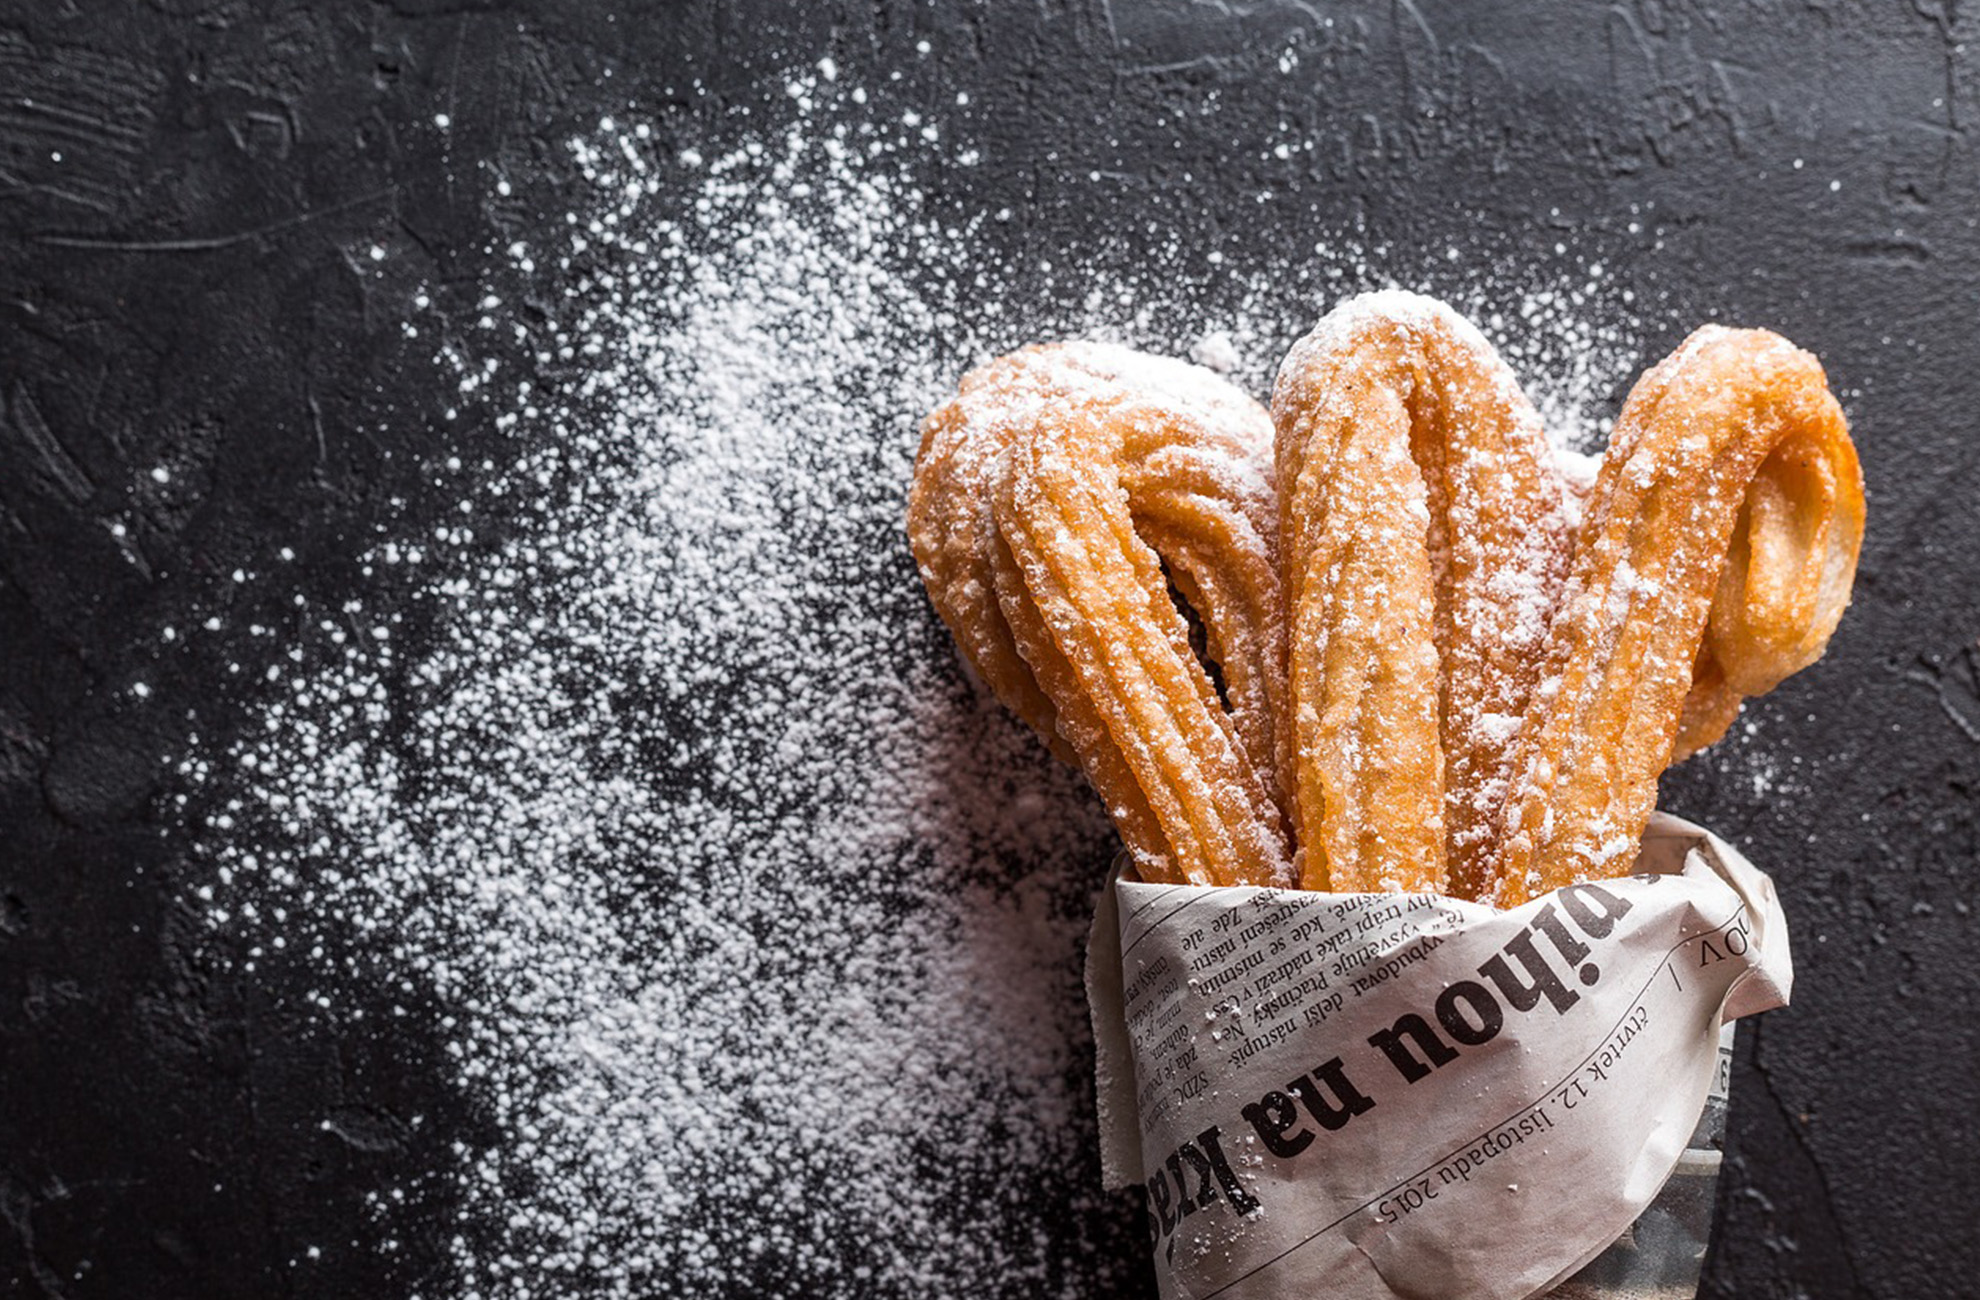 Indulge in some tasty churros at the Whitchurch Food Festival sponsored by Combermere Abbey